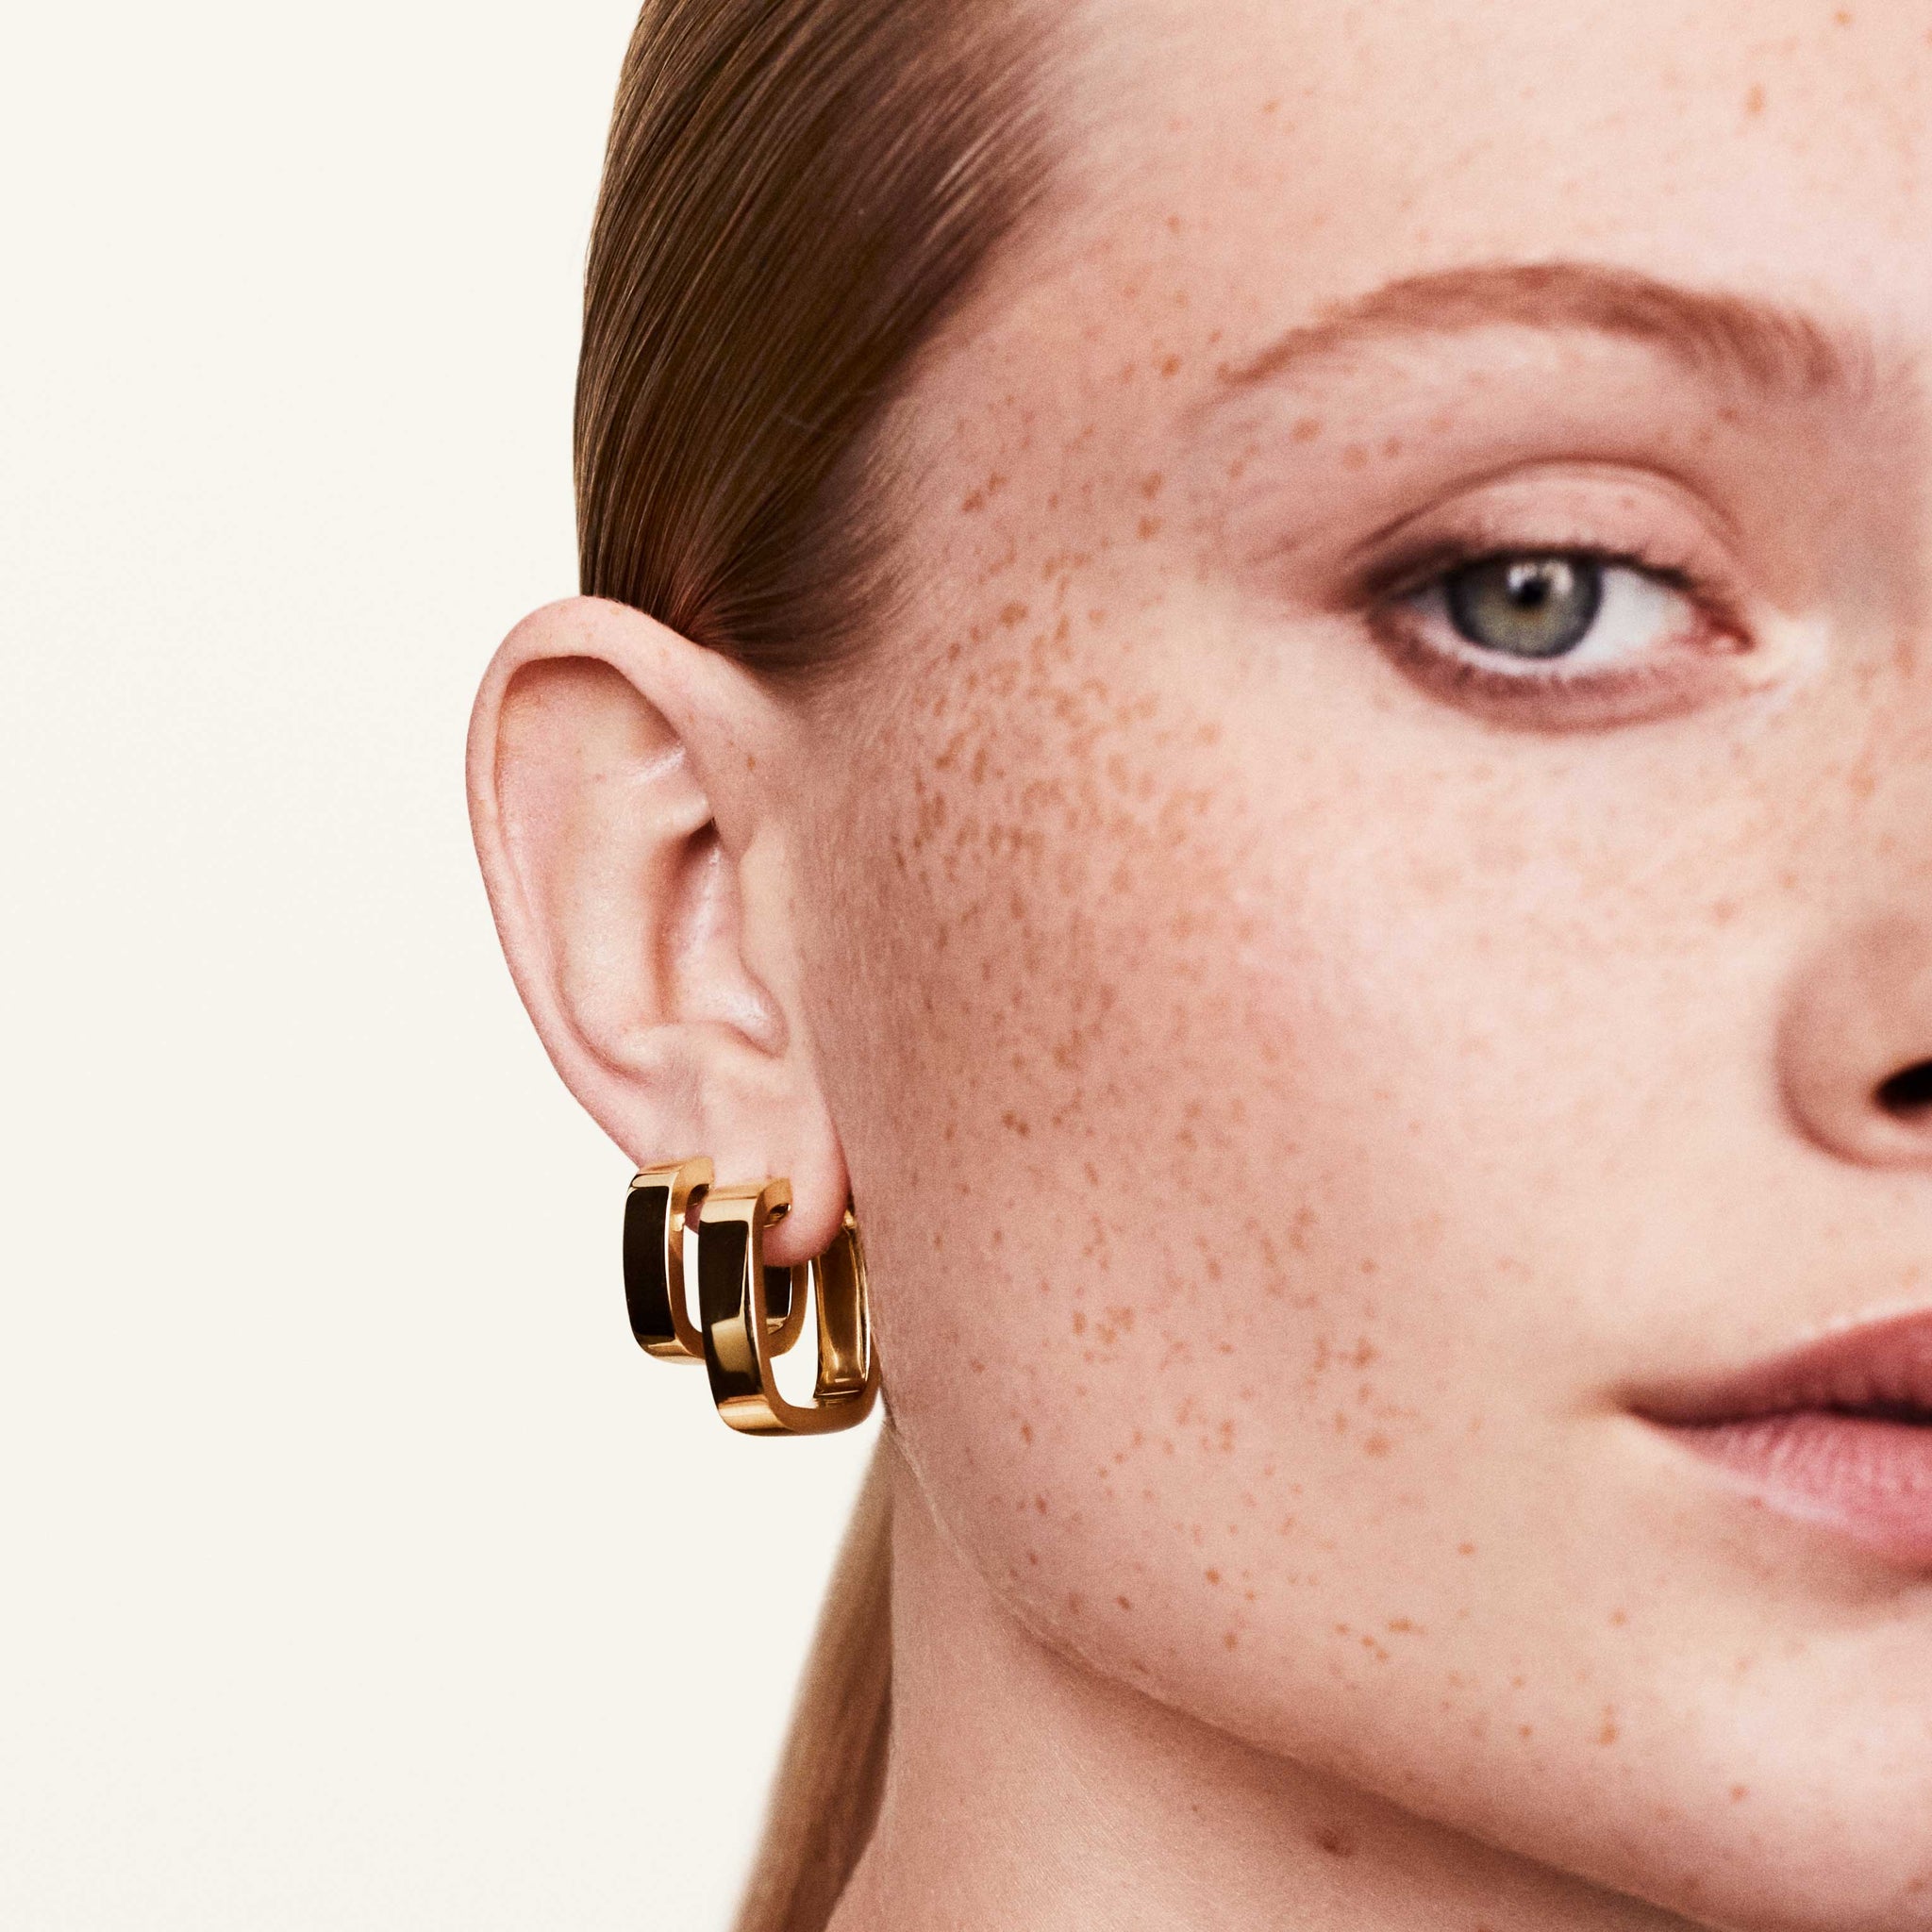 A person wearing gold square hoop earrings